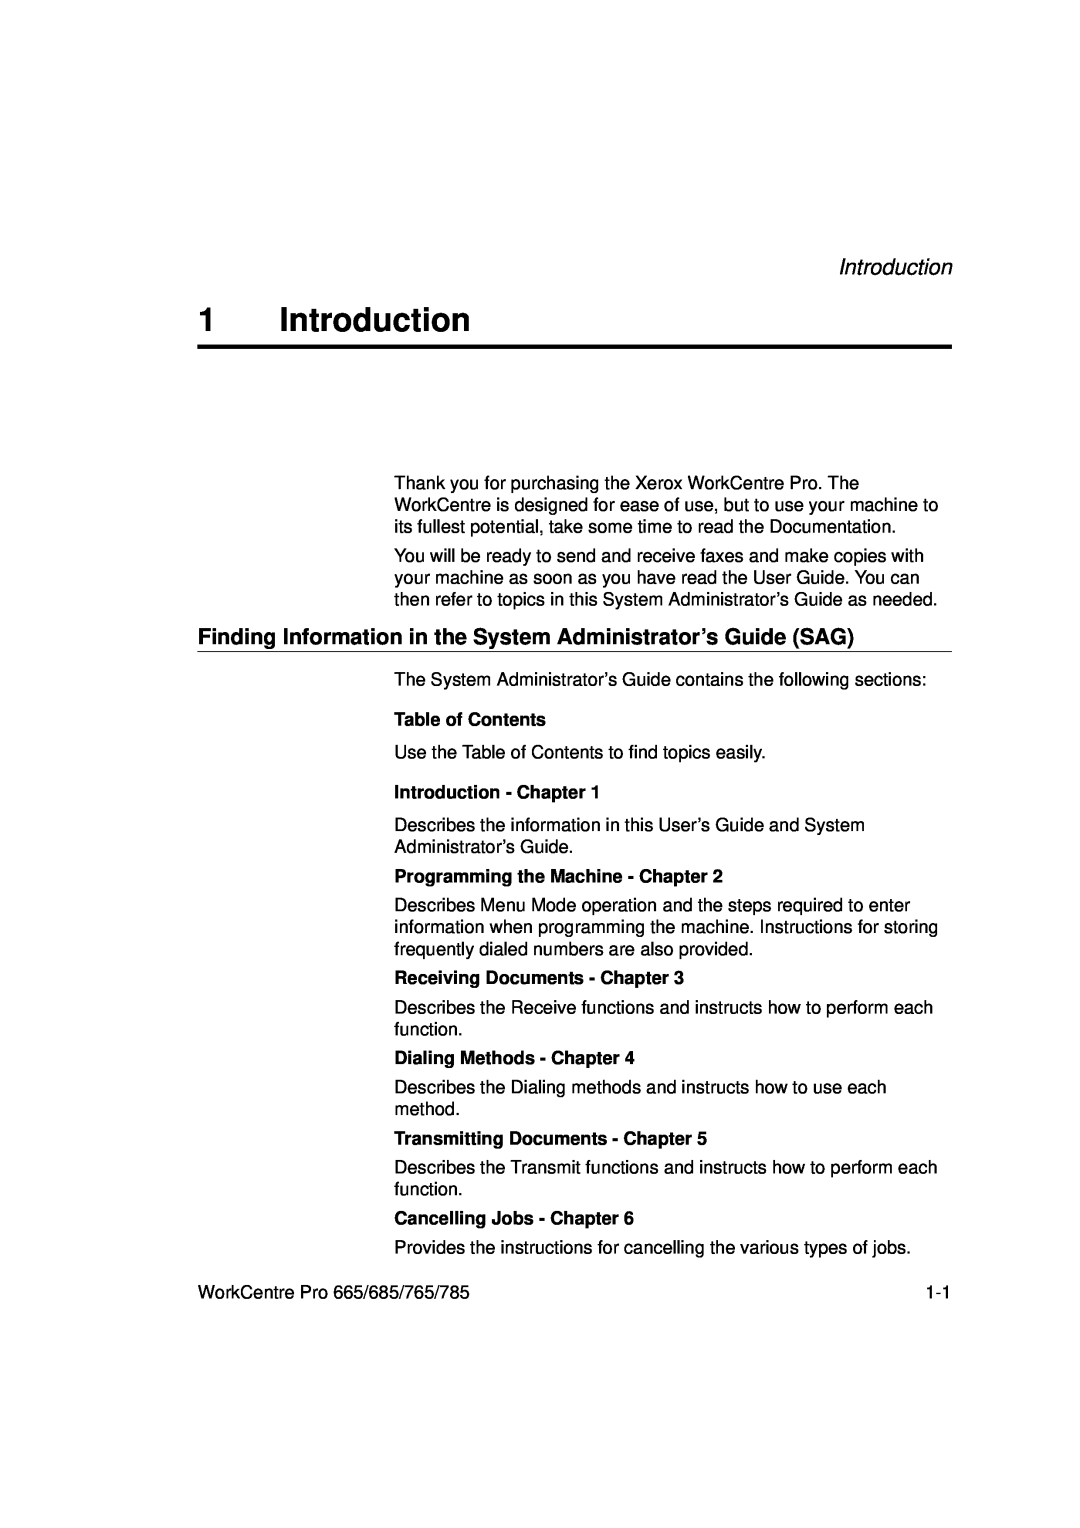 Xerox 785 Table of Contents, Introduction - Chapter, Programming the Machine - Chapter, Receiving Documents - Chapter 